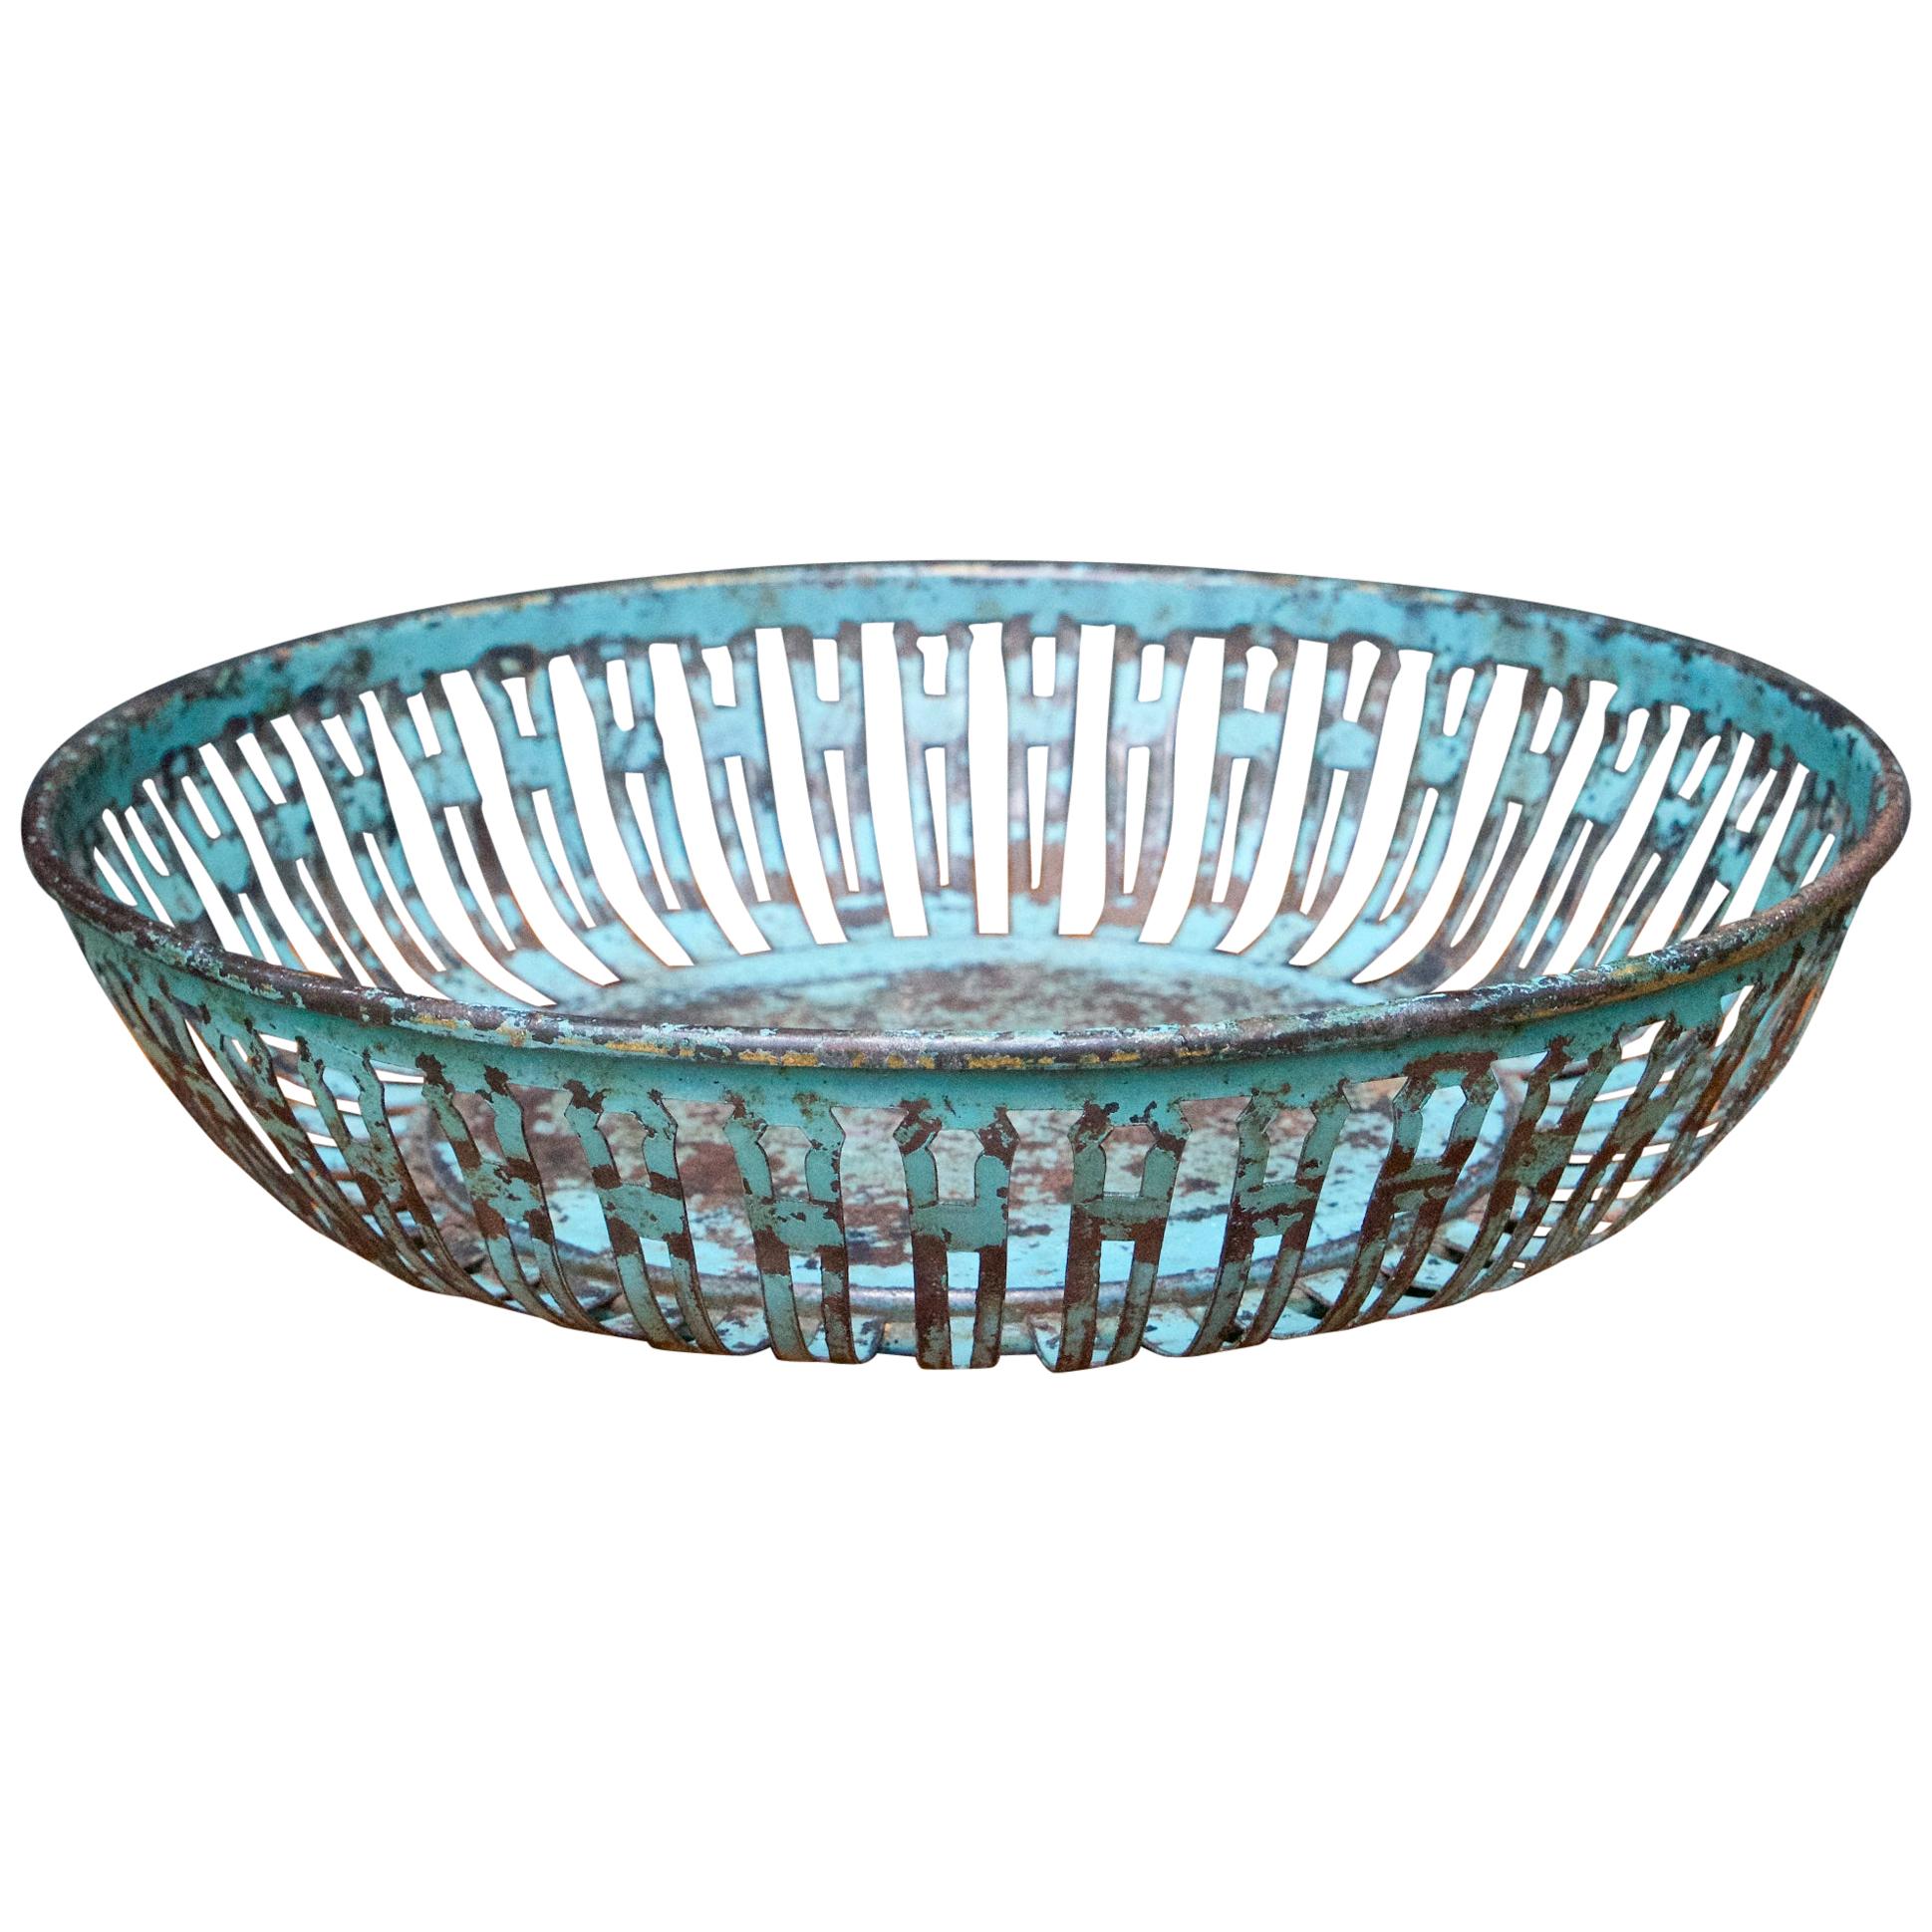 Industrial Metal Arts Reticulated Toleware Basket Bowl Painted Patina Farmhouse 